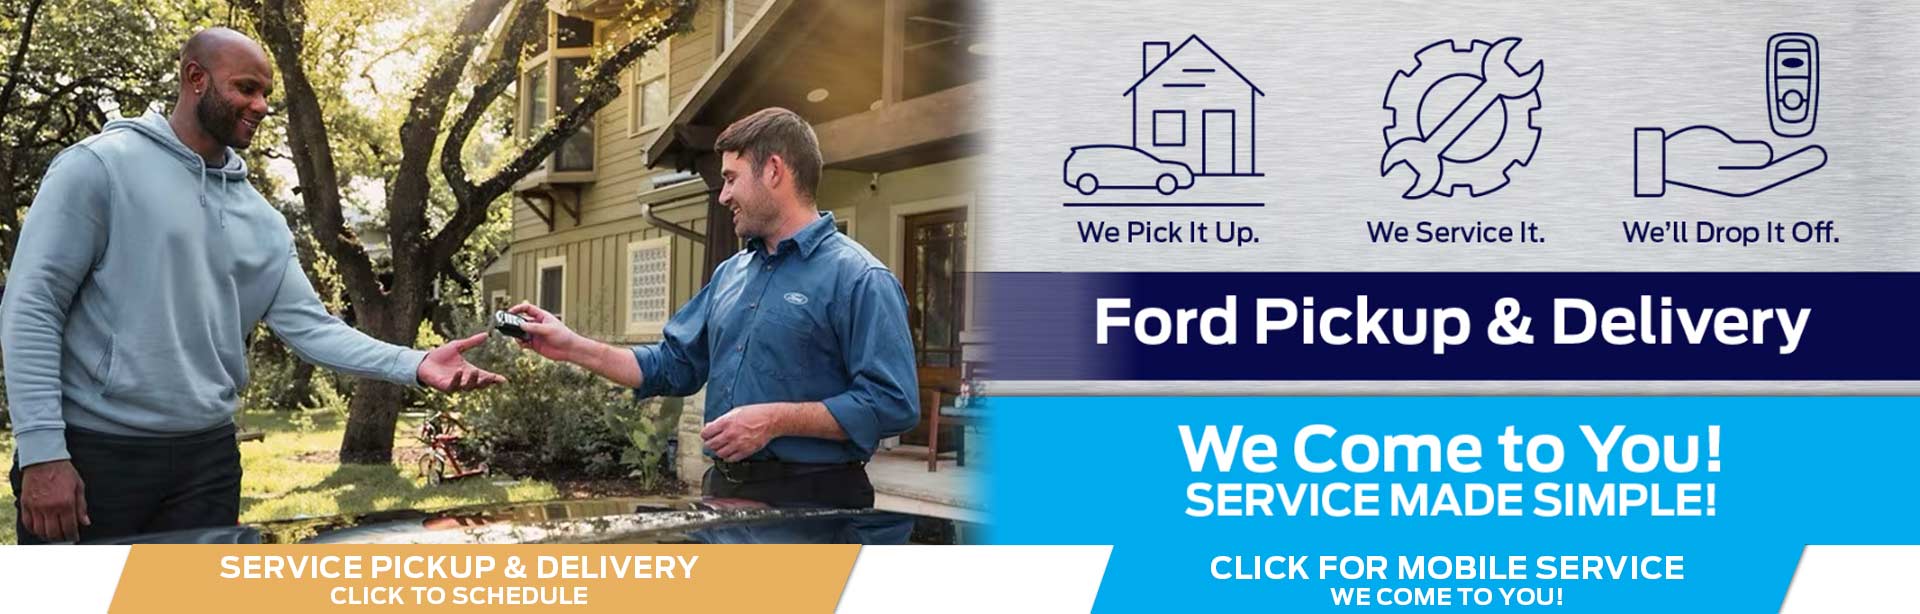 Ford Service Pickup and Delivery